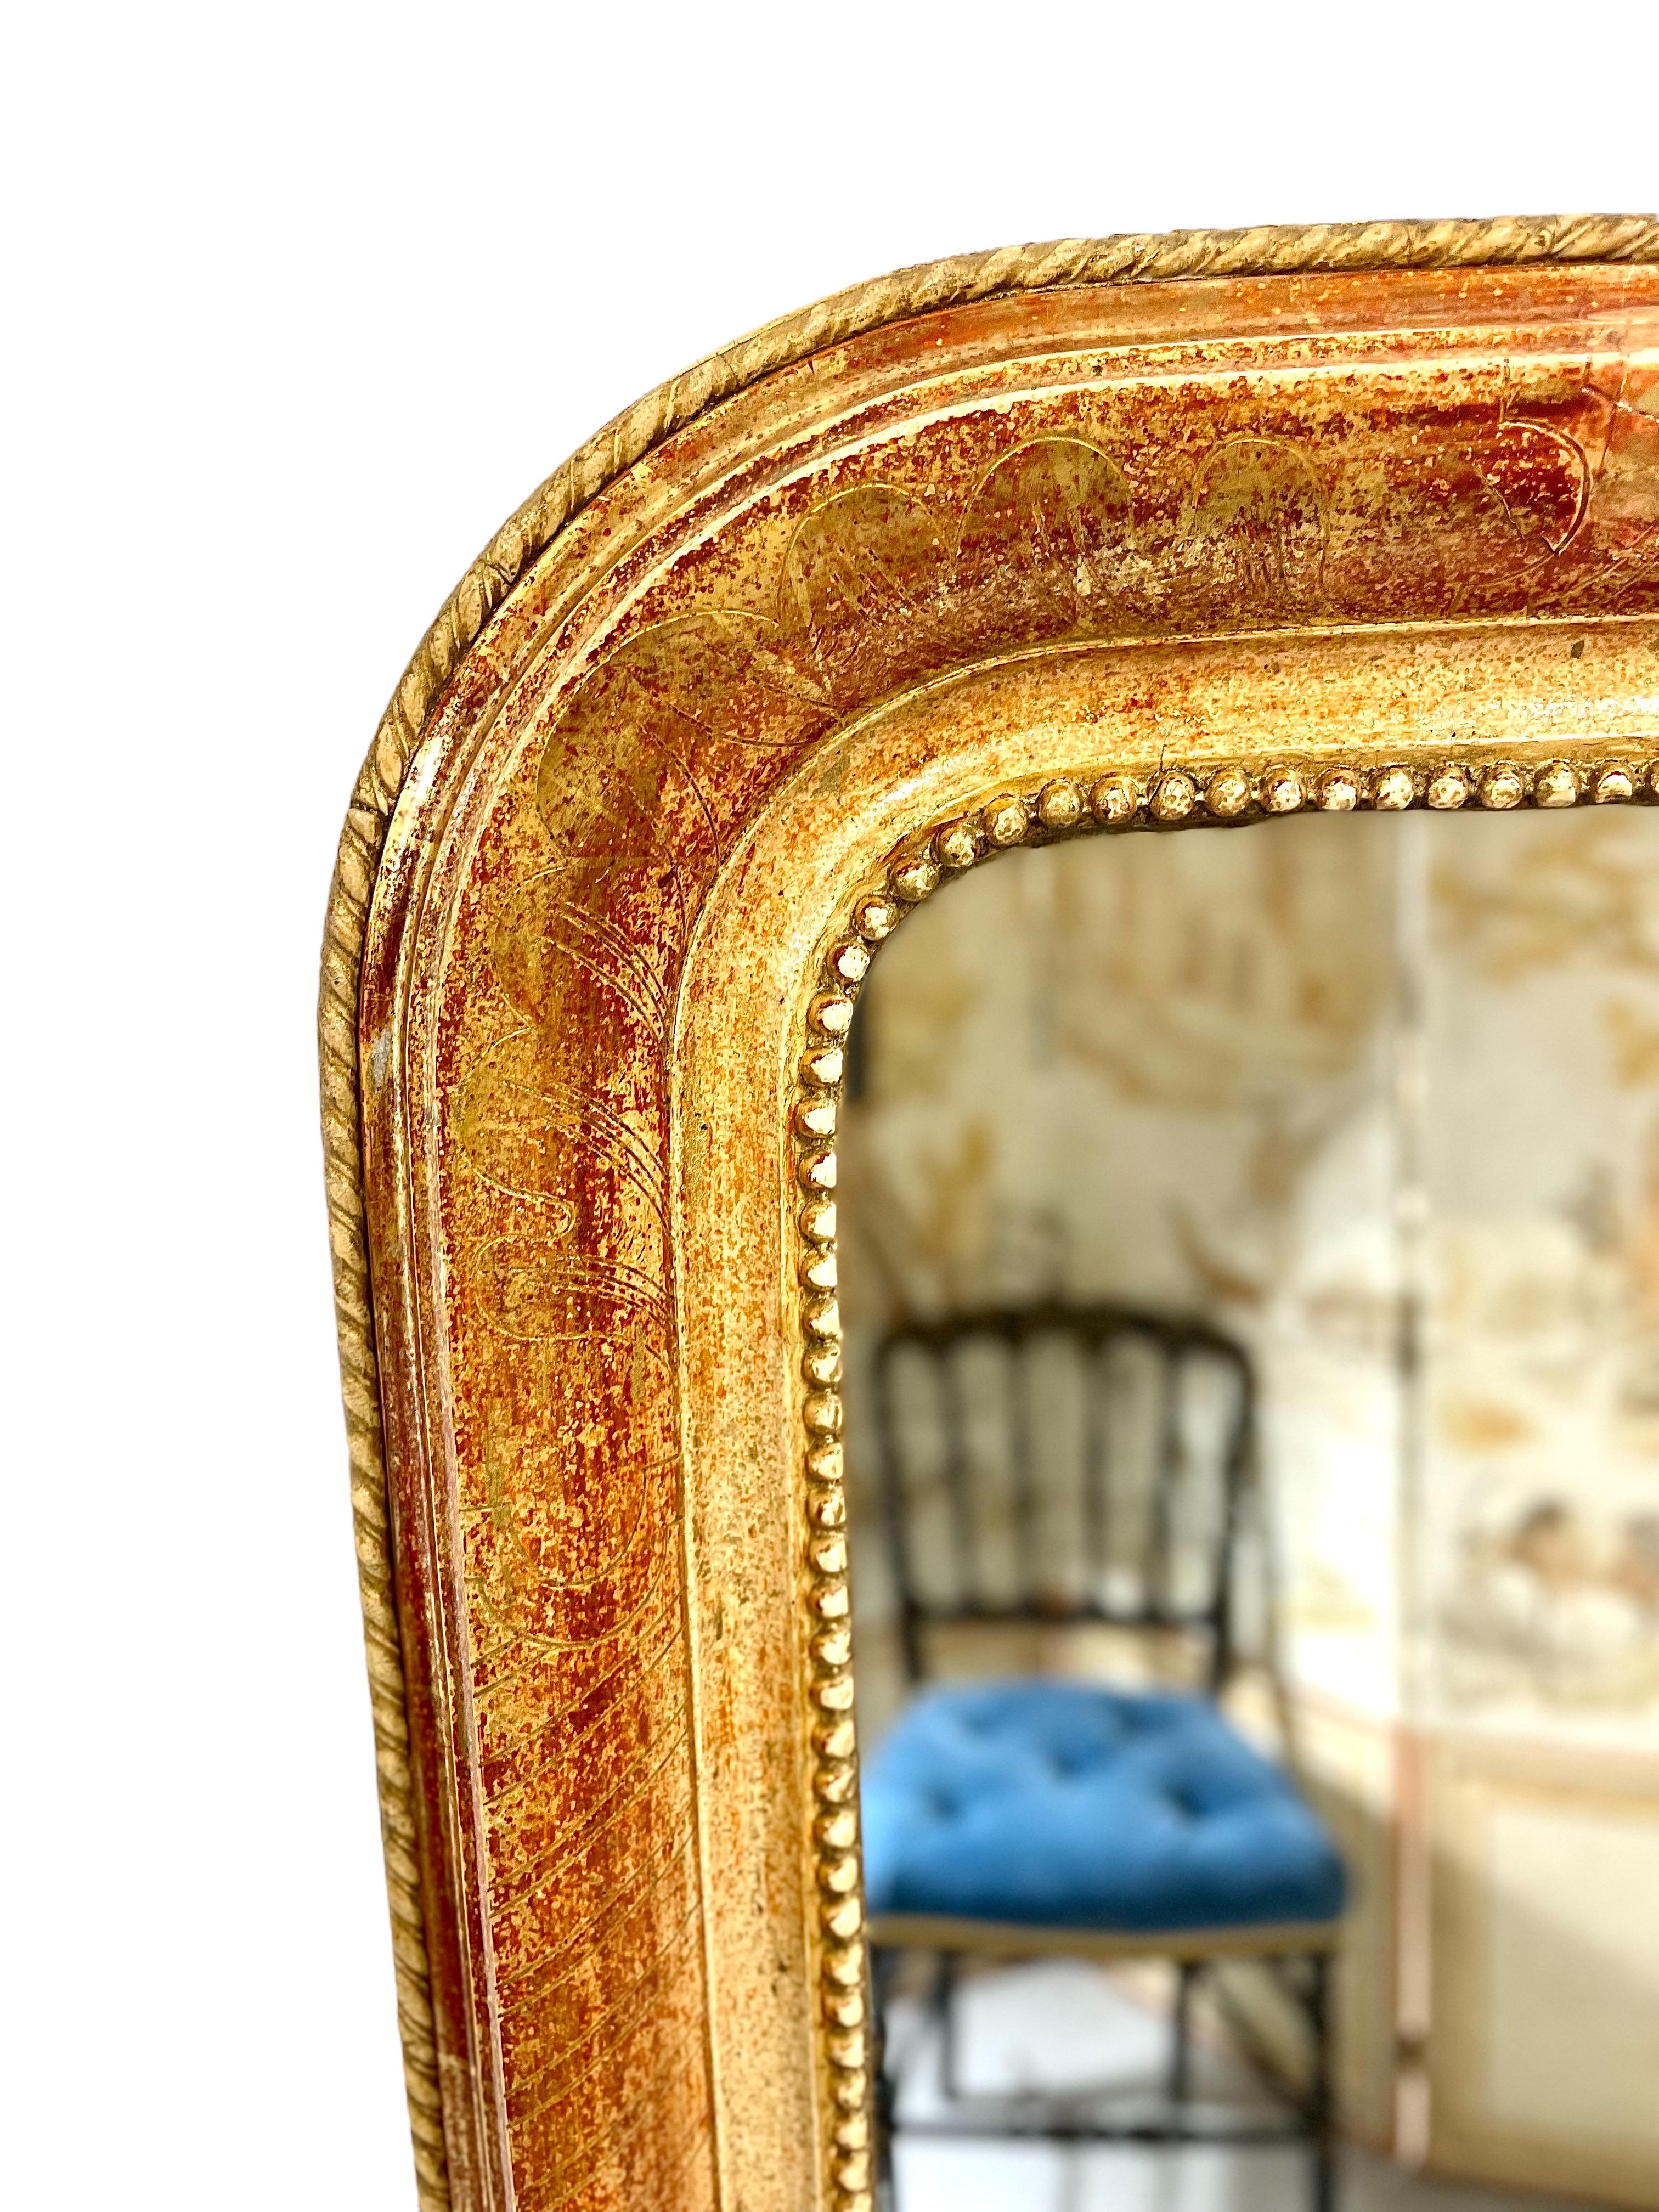 An elegant Louis Philippe giltwood mirror, with the signature rounded upper corners so reminiscent of the period. The frame's inner edge is adorned with a frieze of tiny 'pearls' to enclose the mirror plate, while the four sides are etched with a